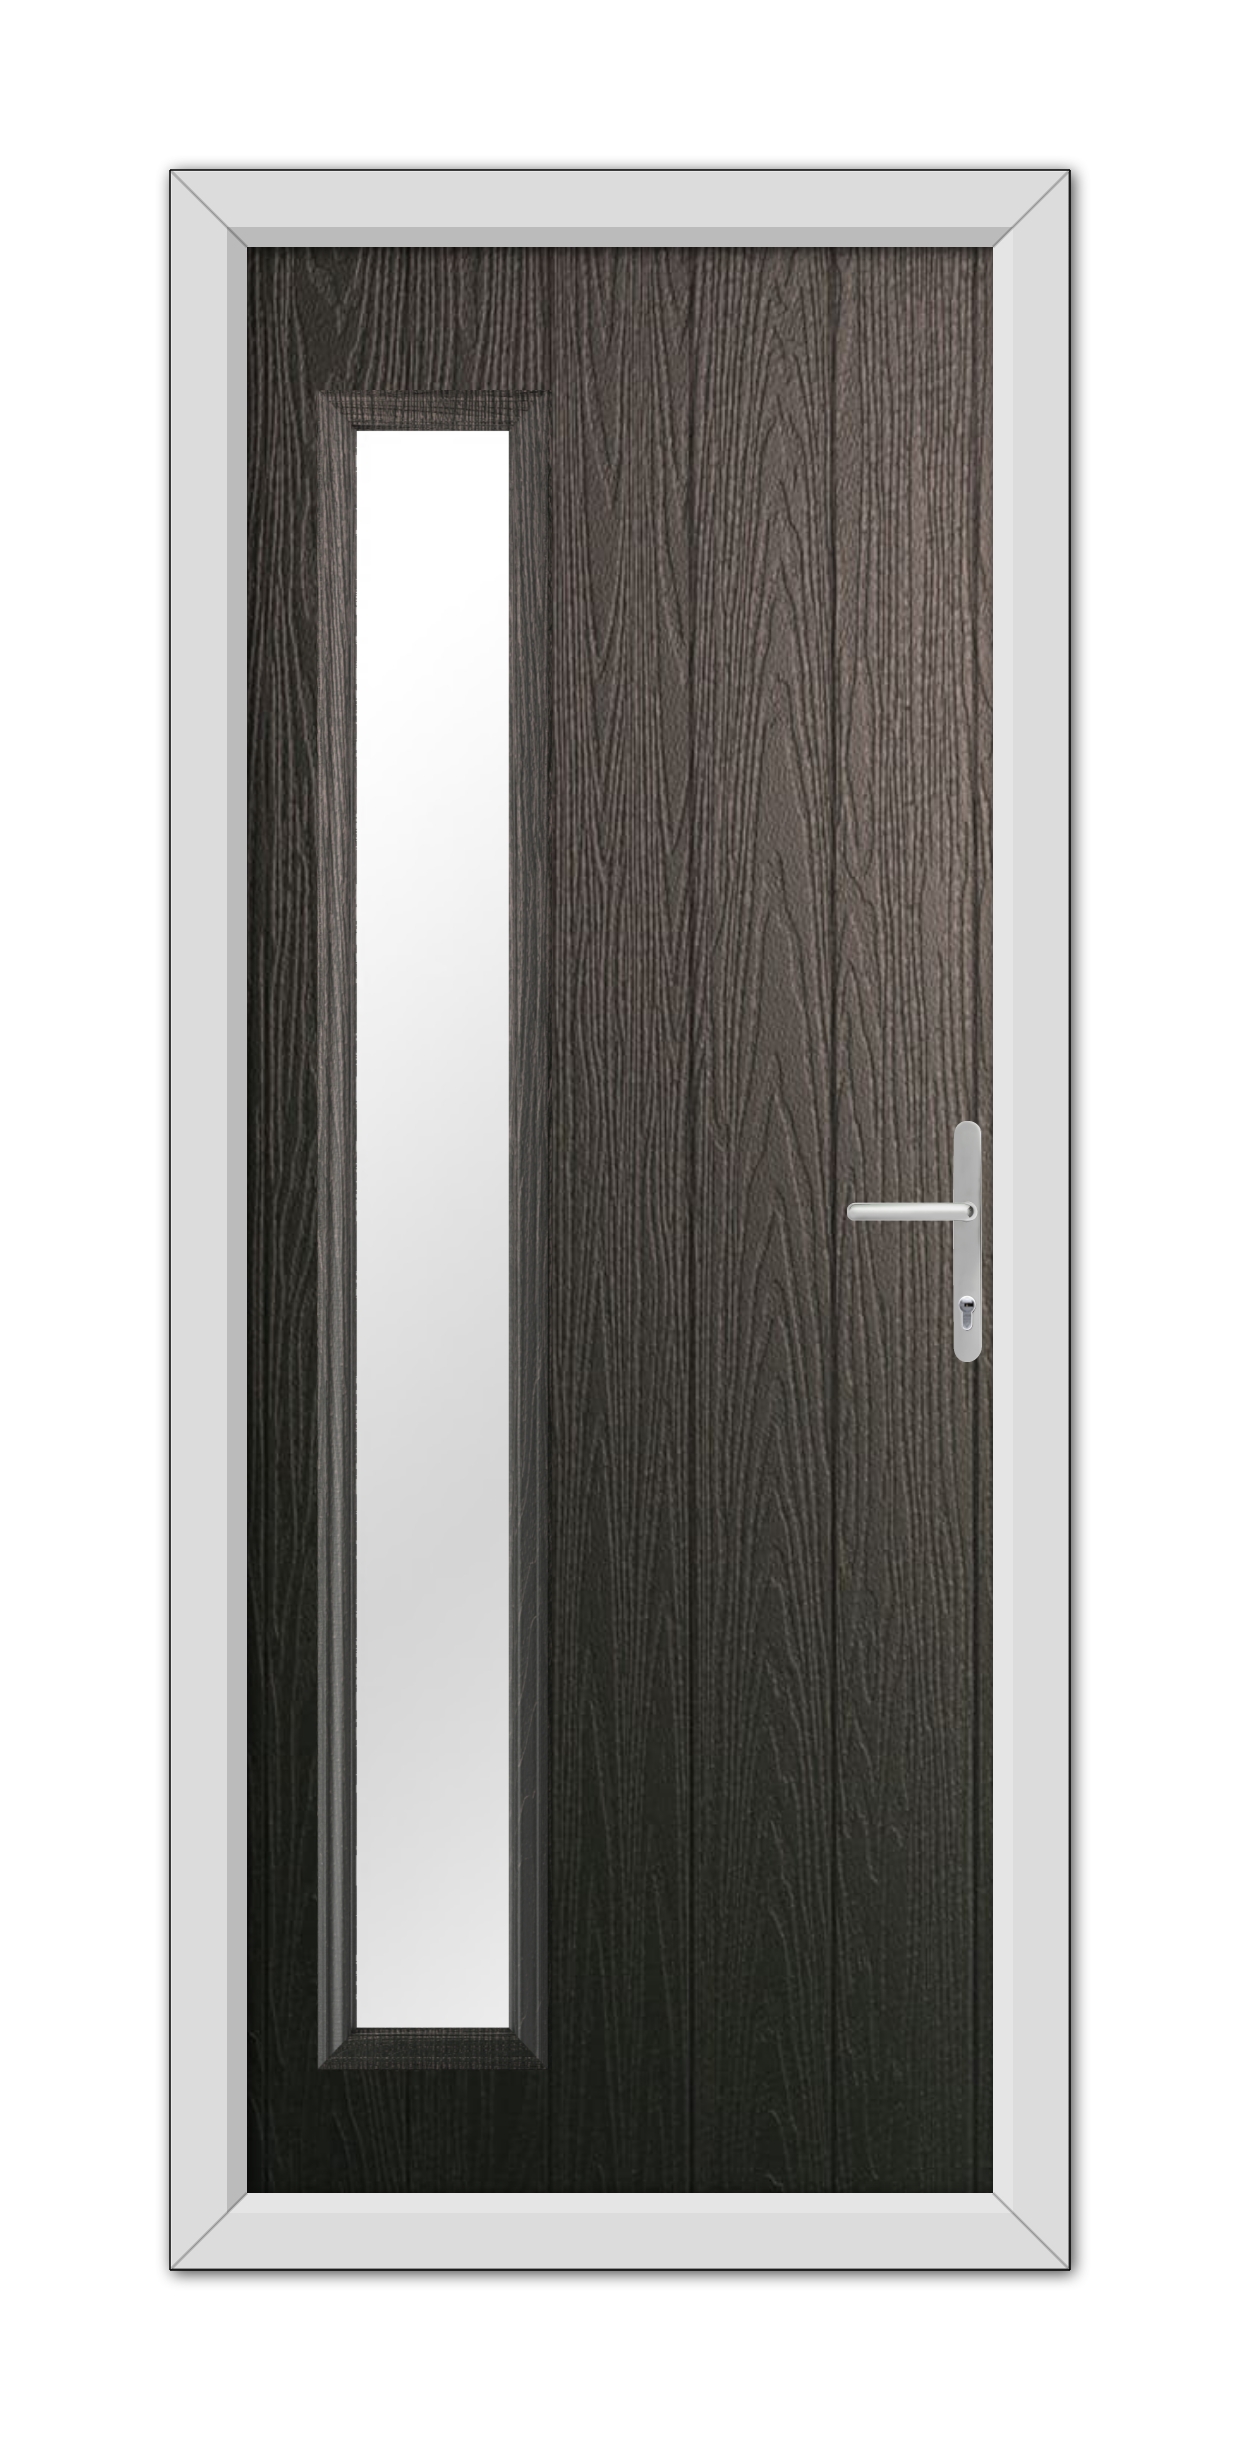 A modern Schwarzbraun Sutherland Composite Door 48mm Timber Core with a vertical rectangular glass panel and a silver handle, set in a white frame.